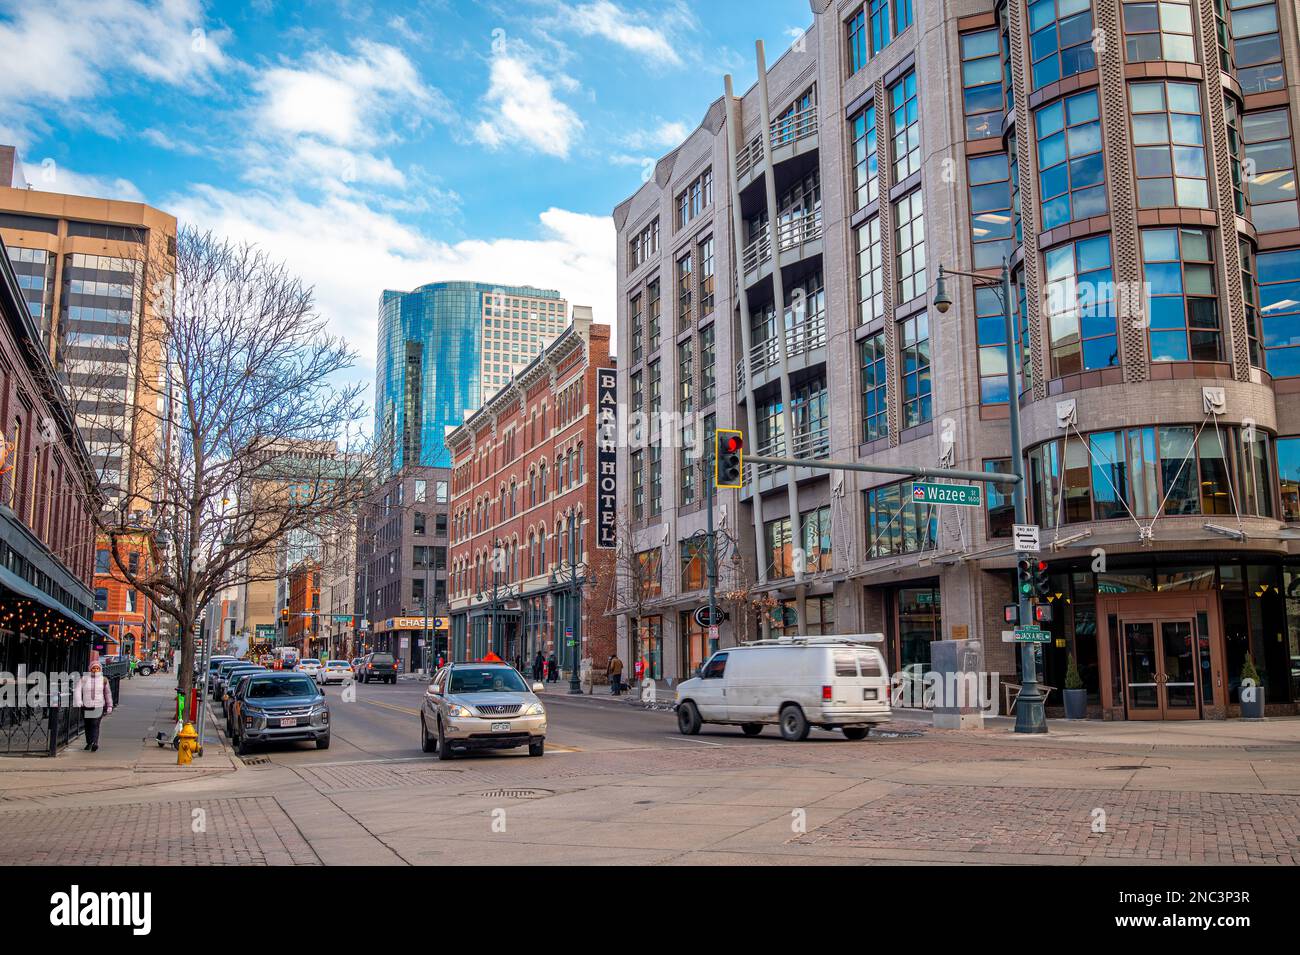 DENVER, COLORADO - FEBRUARY 2023: View of some of the buildings in downtown Denver from Wazee Street near Union Station. Stock Photo